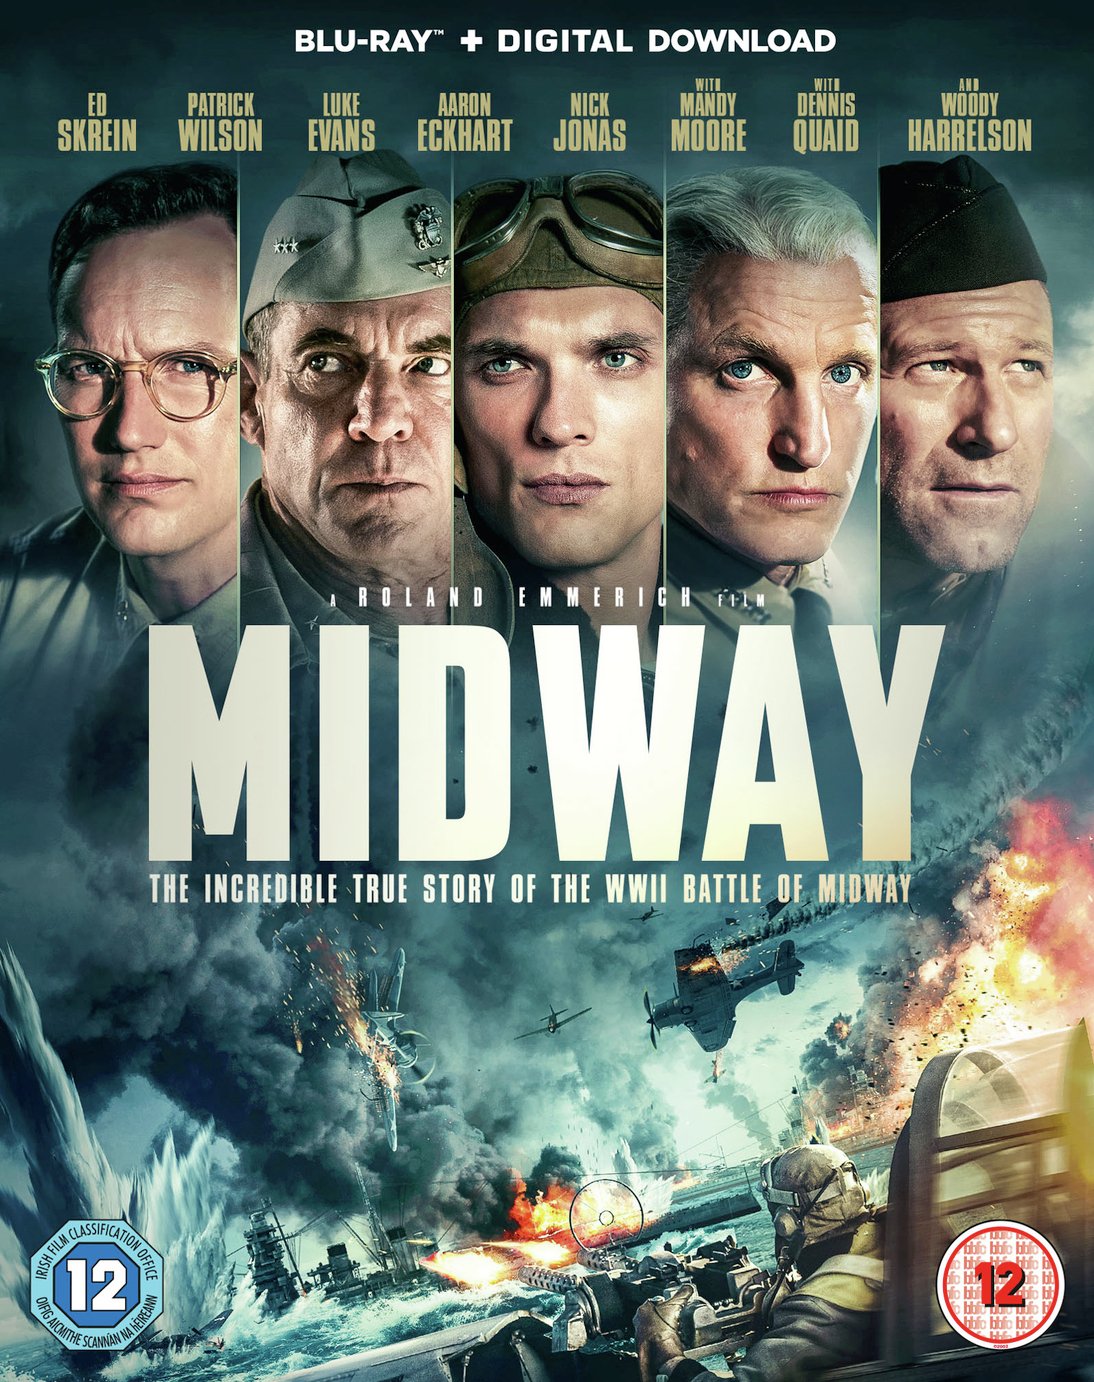 Midway Blu-ray Review